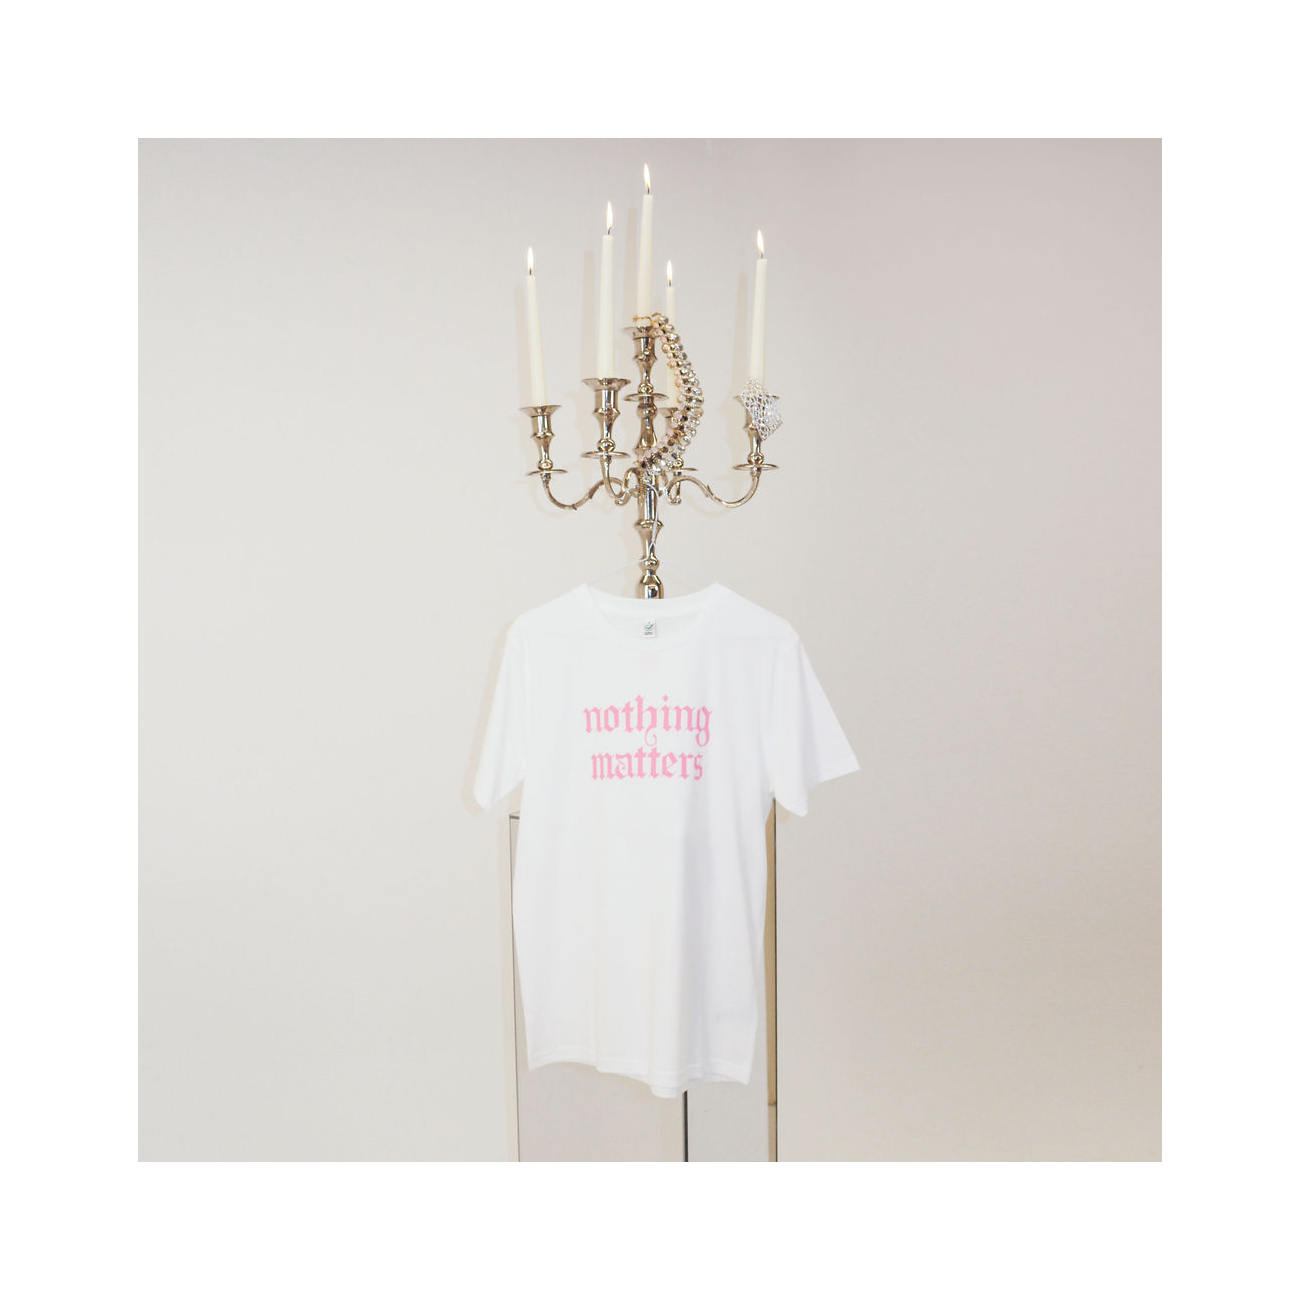 The Last Dinner Party - Nothing Matters: Unisex Tee